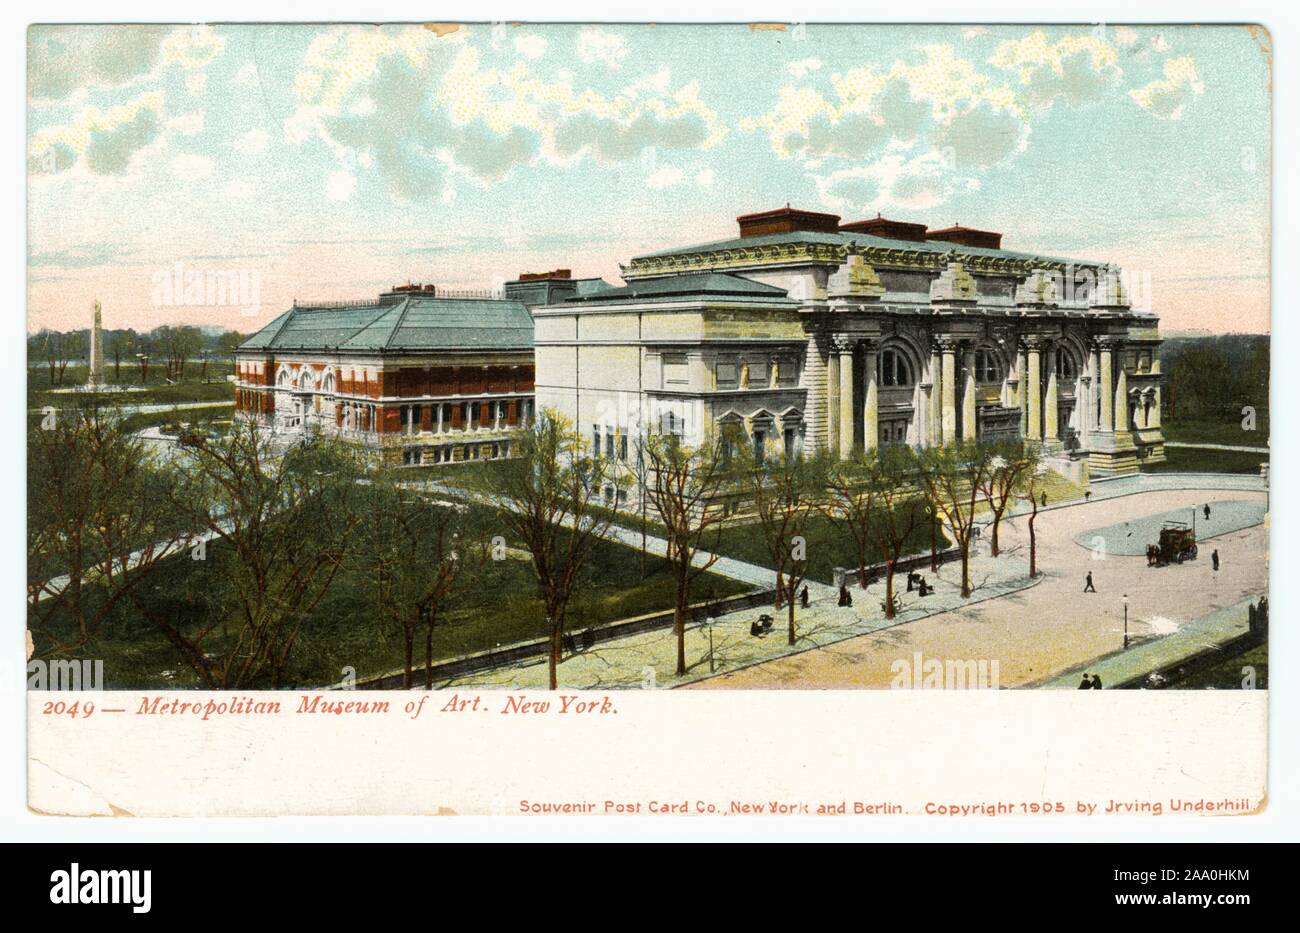 Illustrated postcard of the the Metropolitan Museum of Art, New York City, copyright by Irving Underhill, published by Souvenir Post Card Co, 1905. From the New York Public Library. () Stock Photo